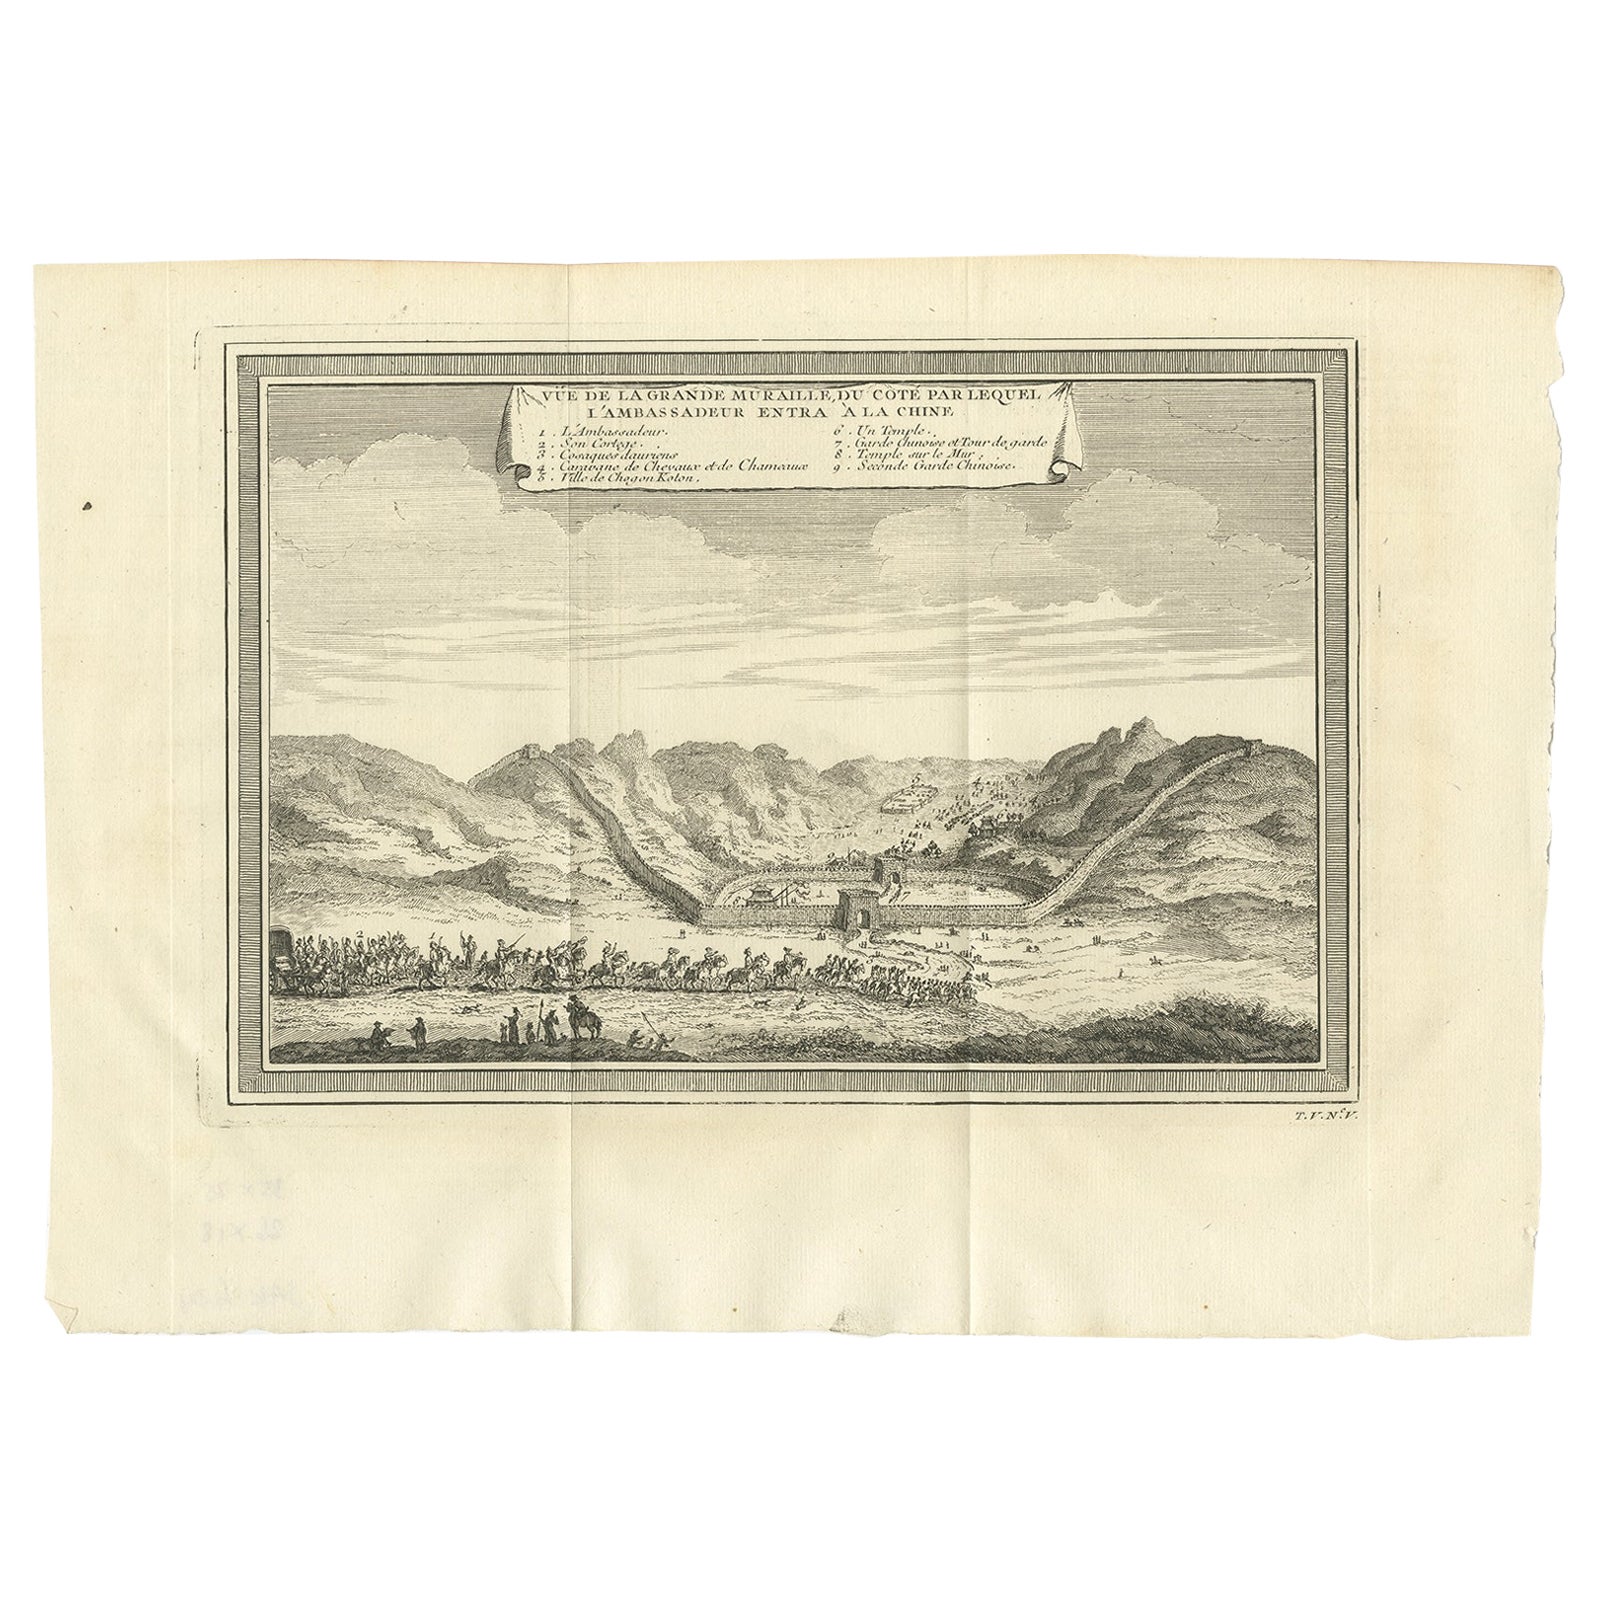 Antique Print of the Great Wall of China, 1746